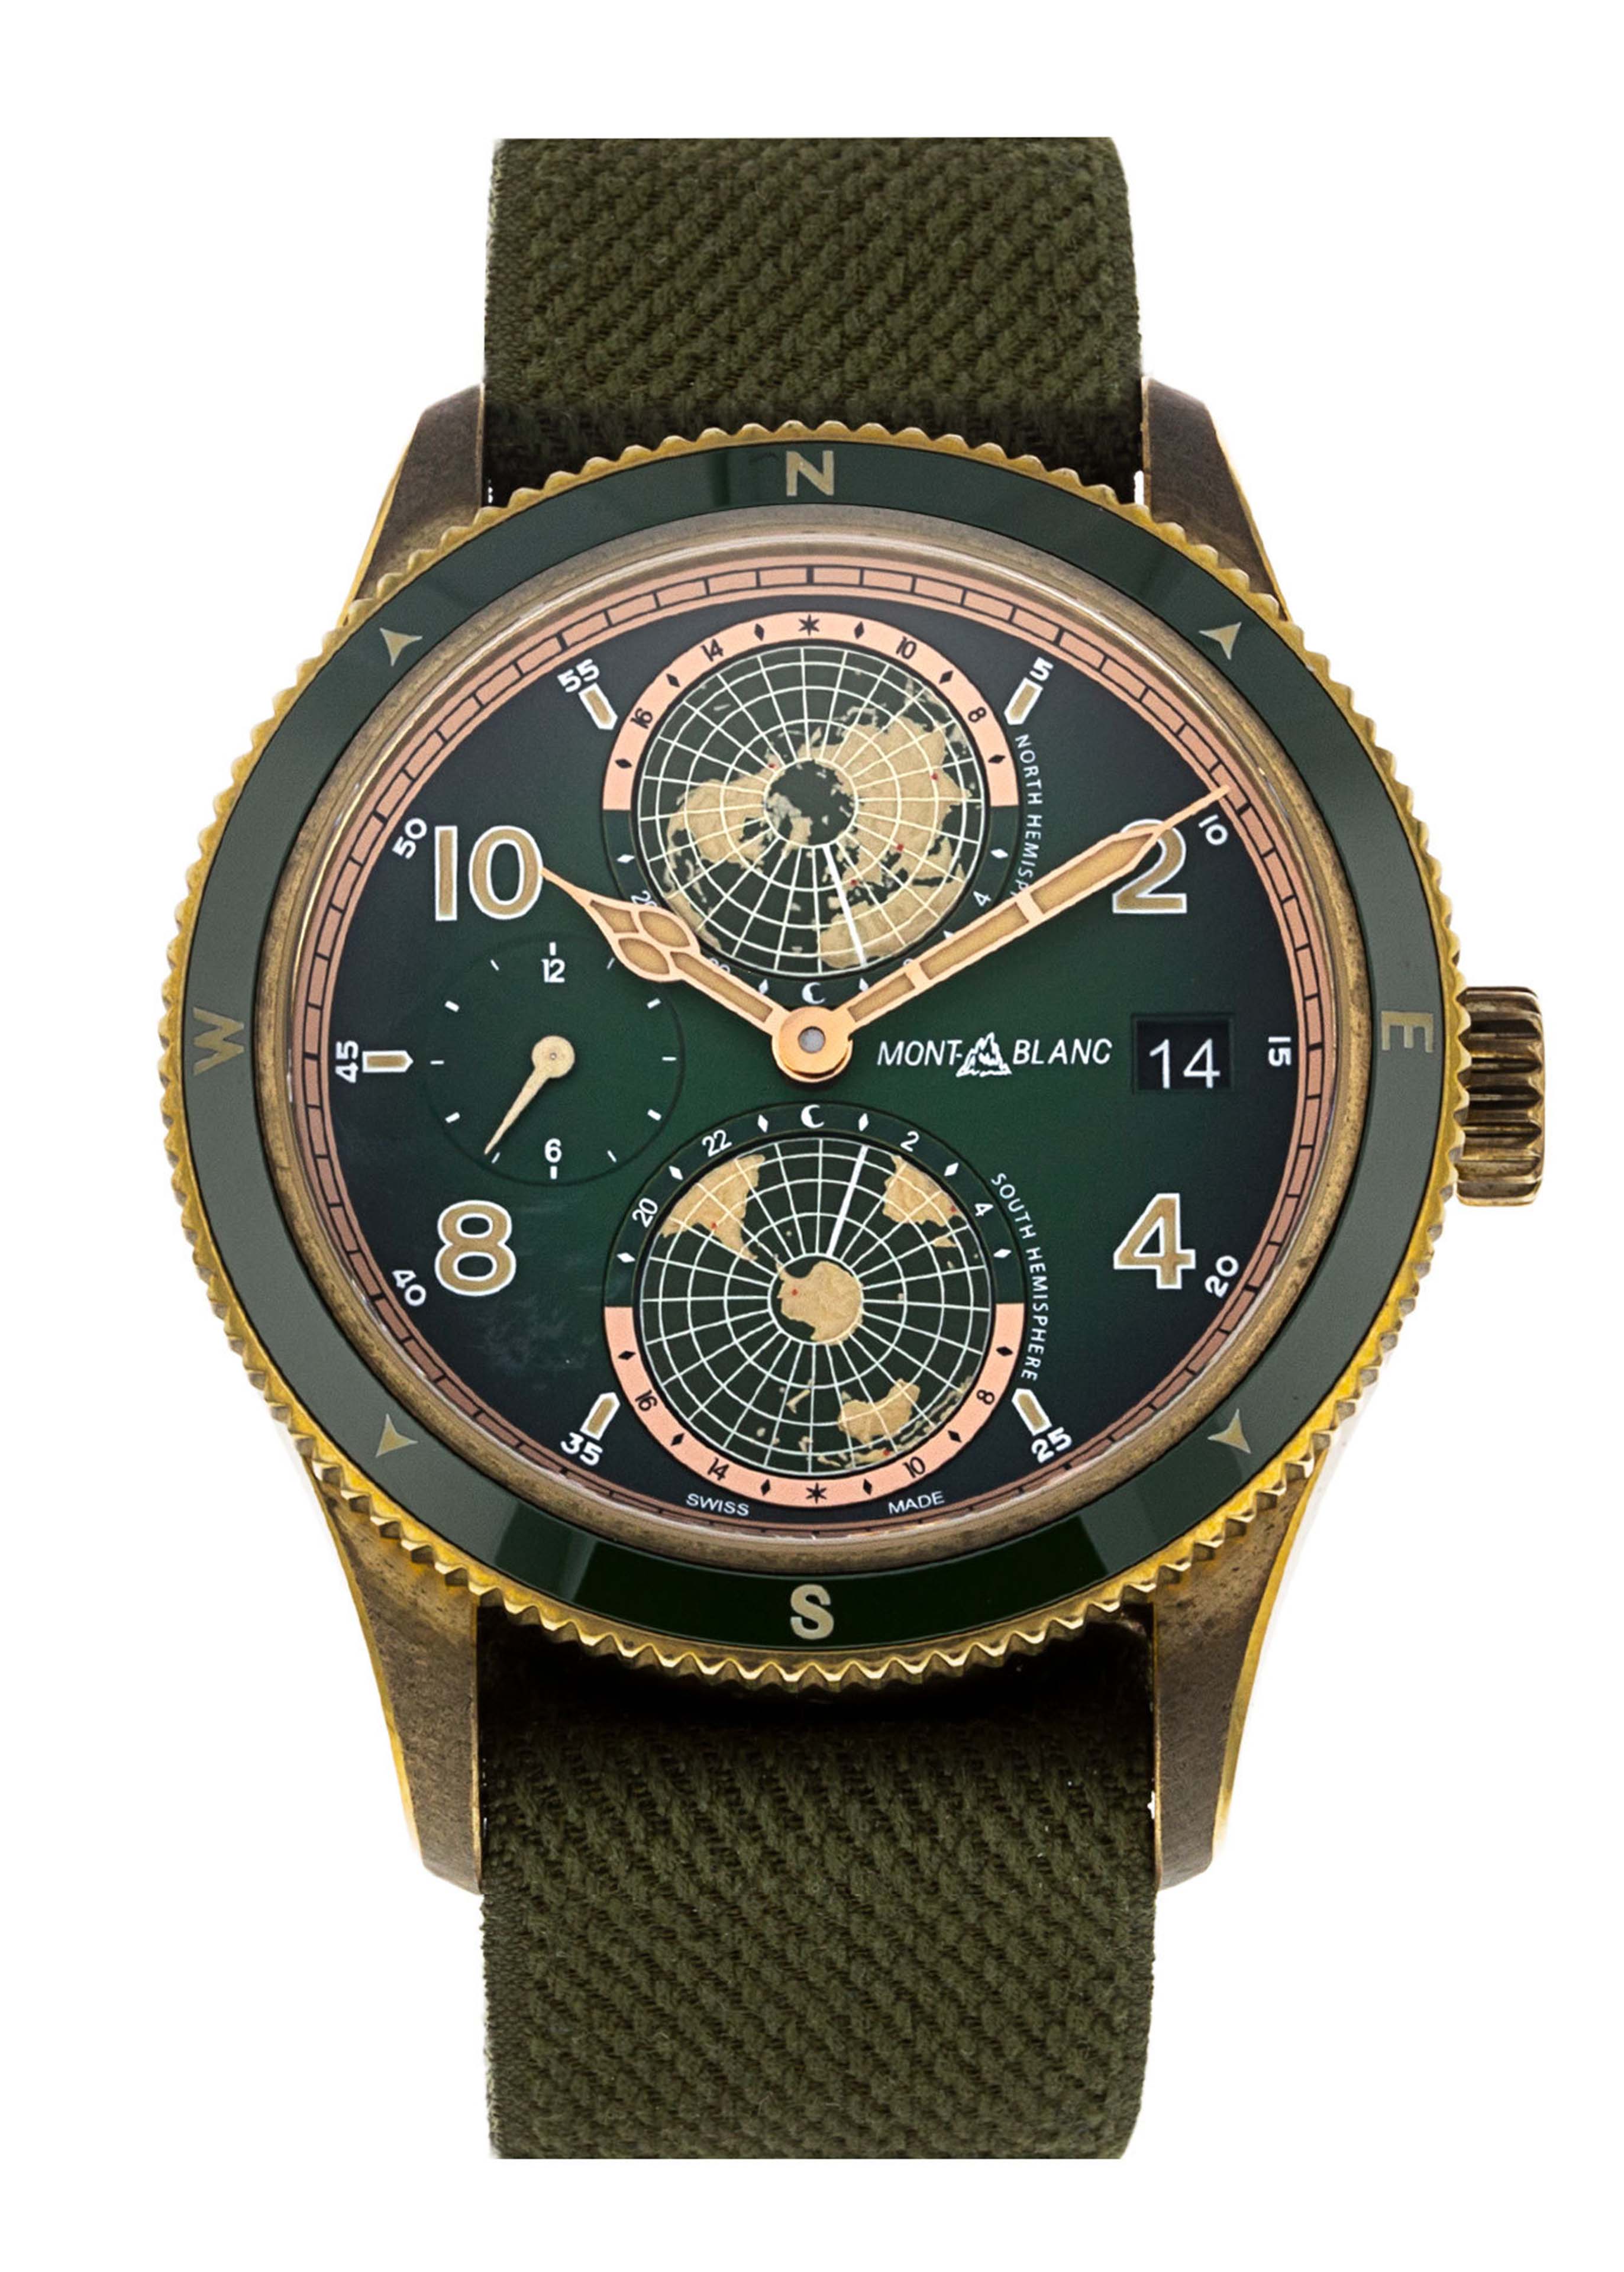 Geosphere Limited Edition Watch - 1858 pieces Image